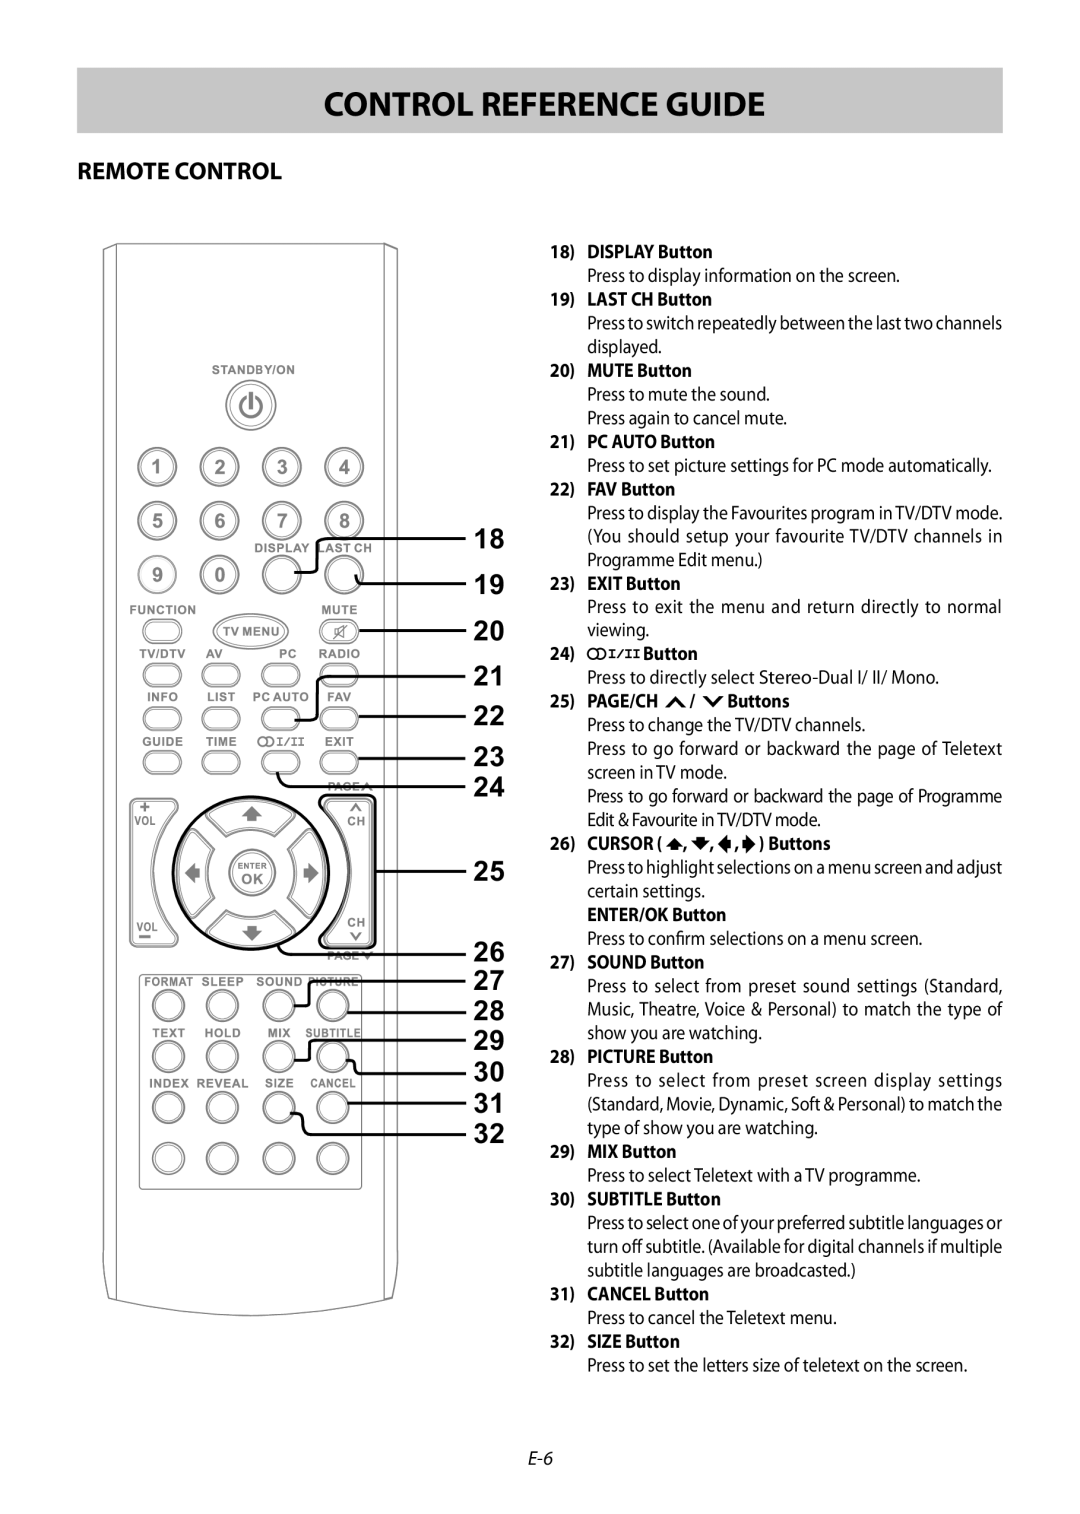 Technika 42-502 manual Control Reference Guide, Remote Control, Press to display information on the screen 